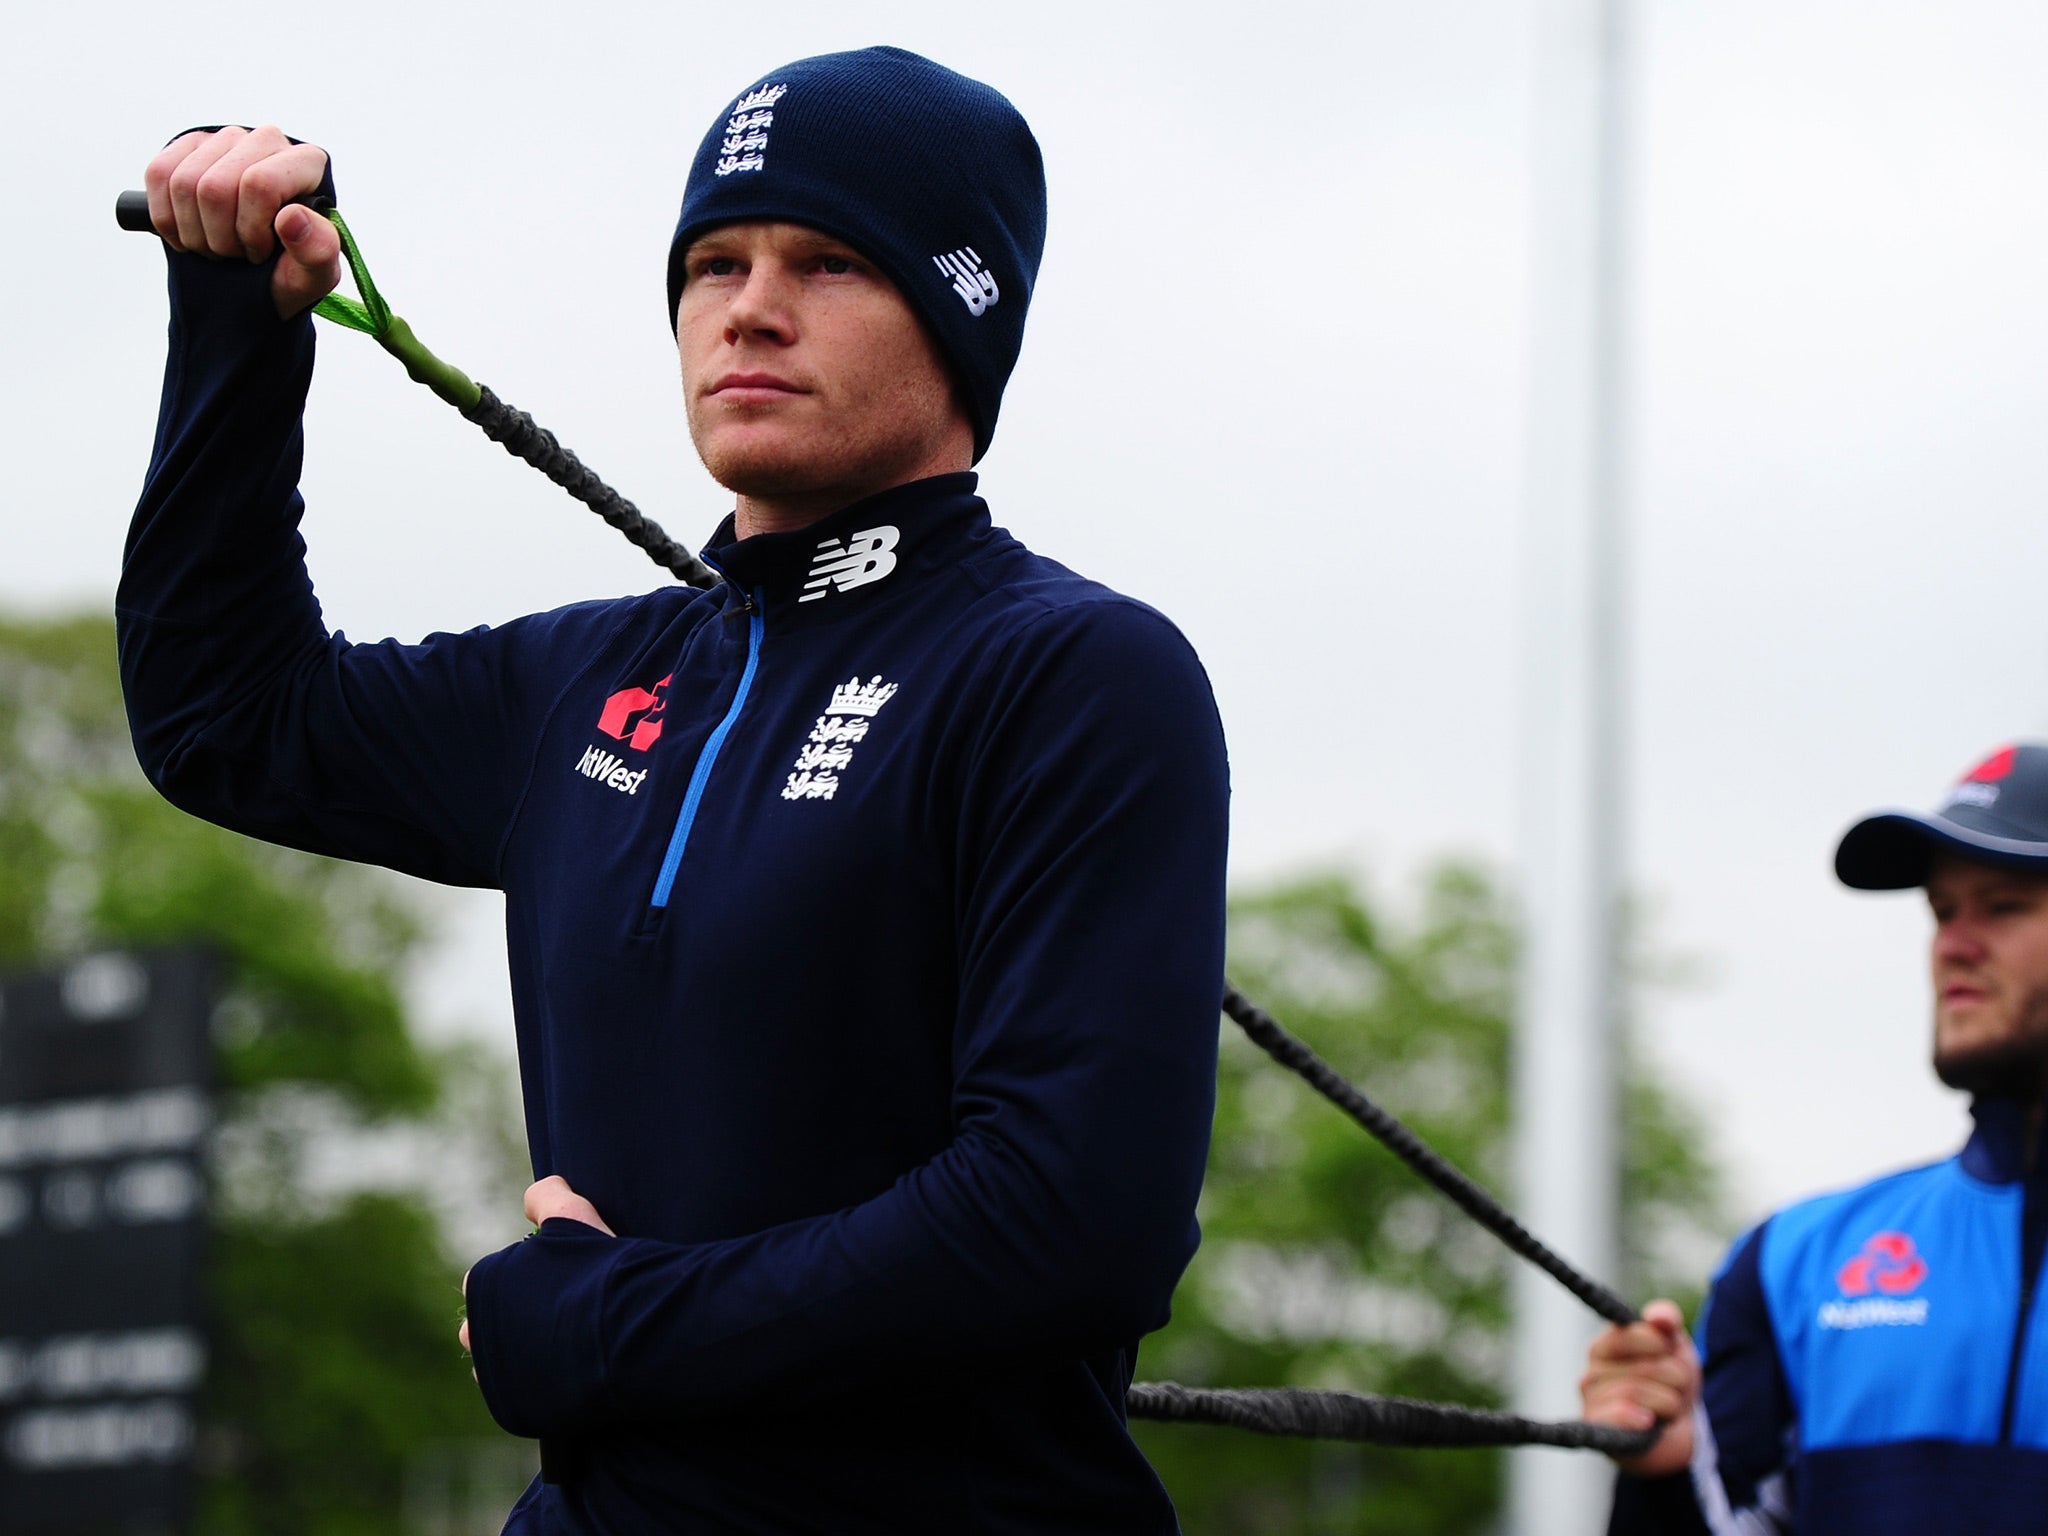 The England camp are in confident mood heading into this summer's Champions Trophy